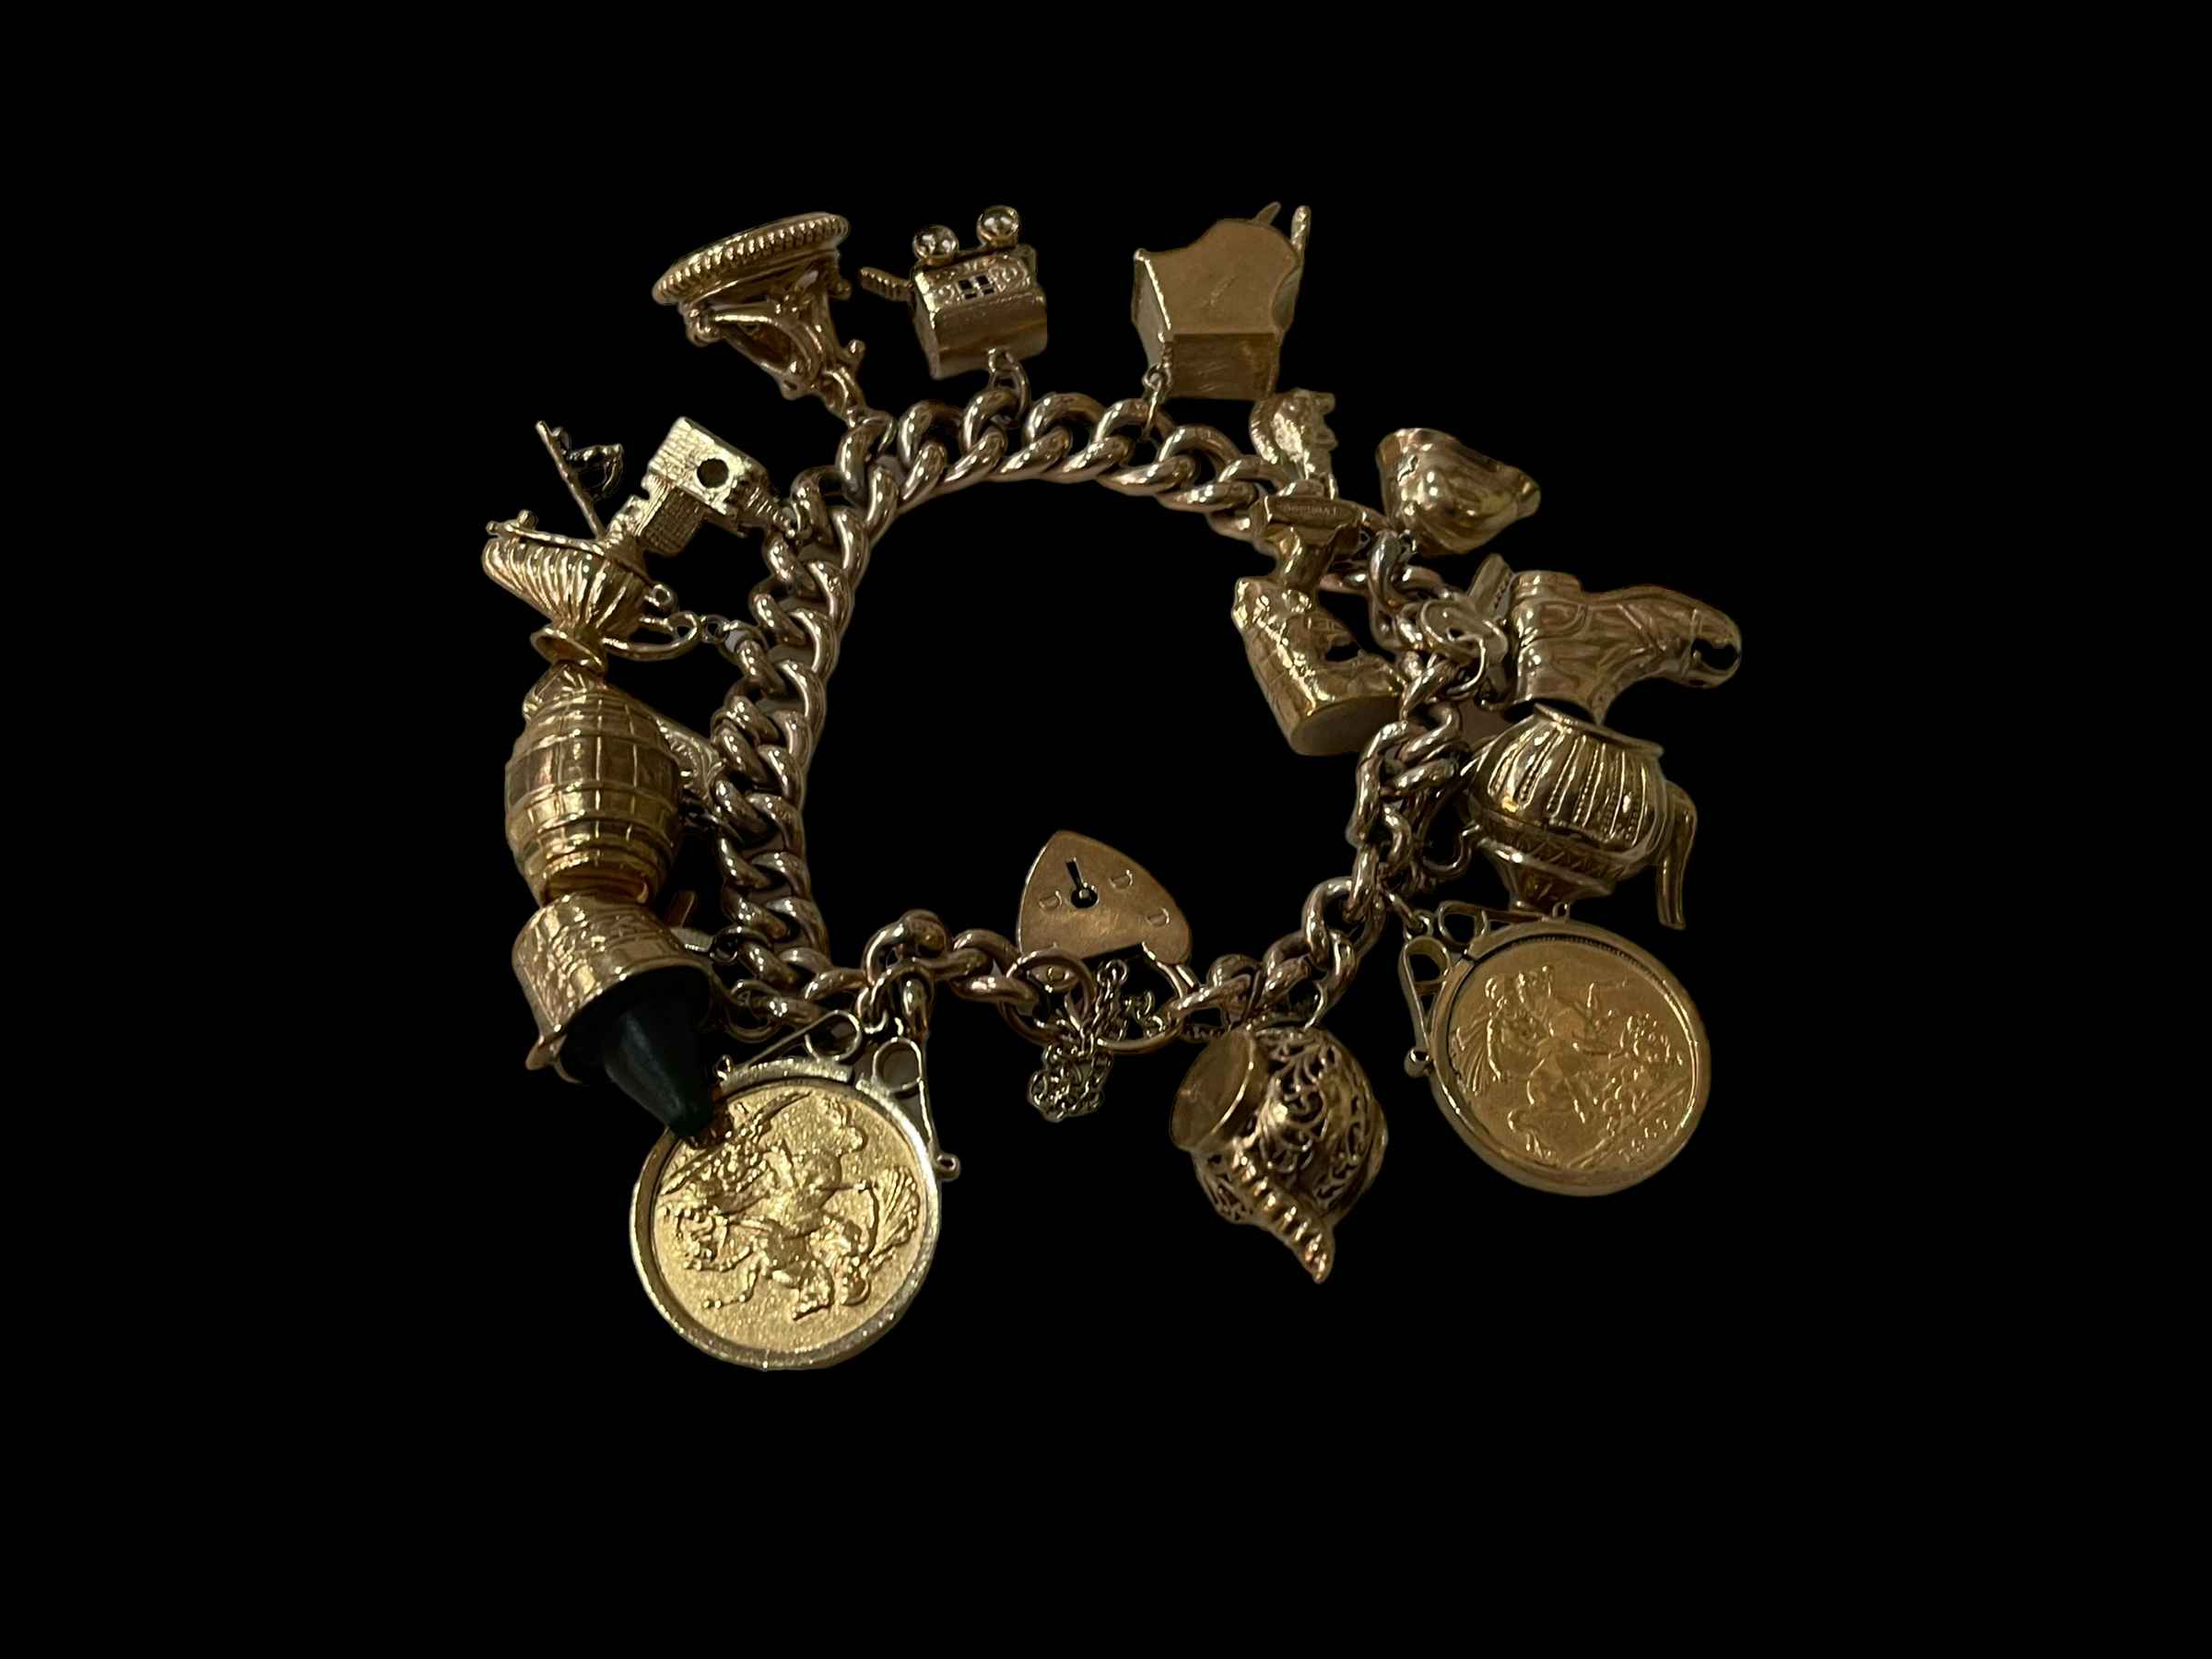 9 carat gold charm bracelet with two gold sovereigns 1907 and 1912, and seventeen charms.